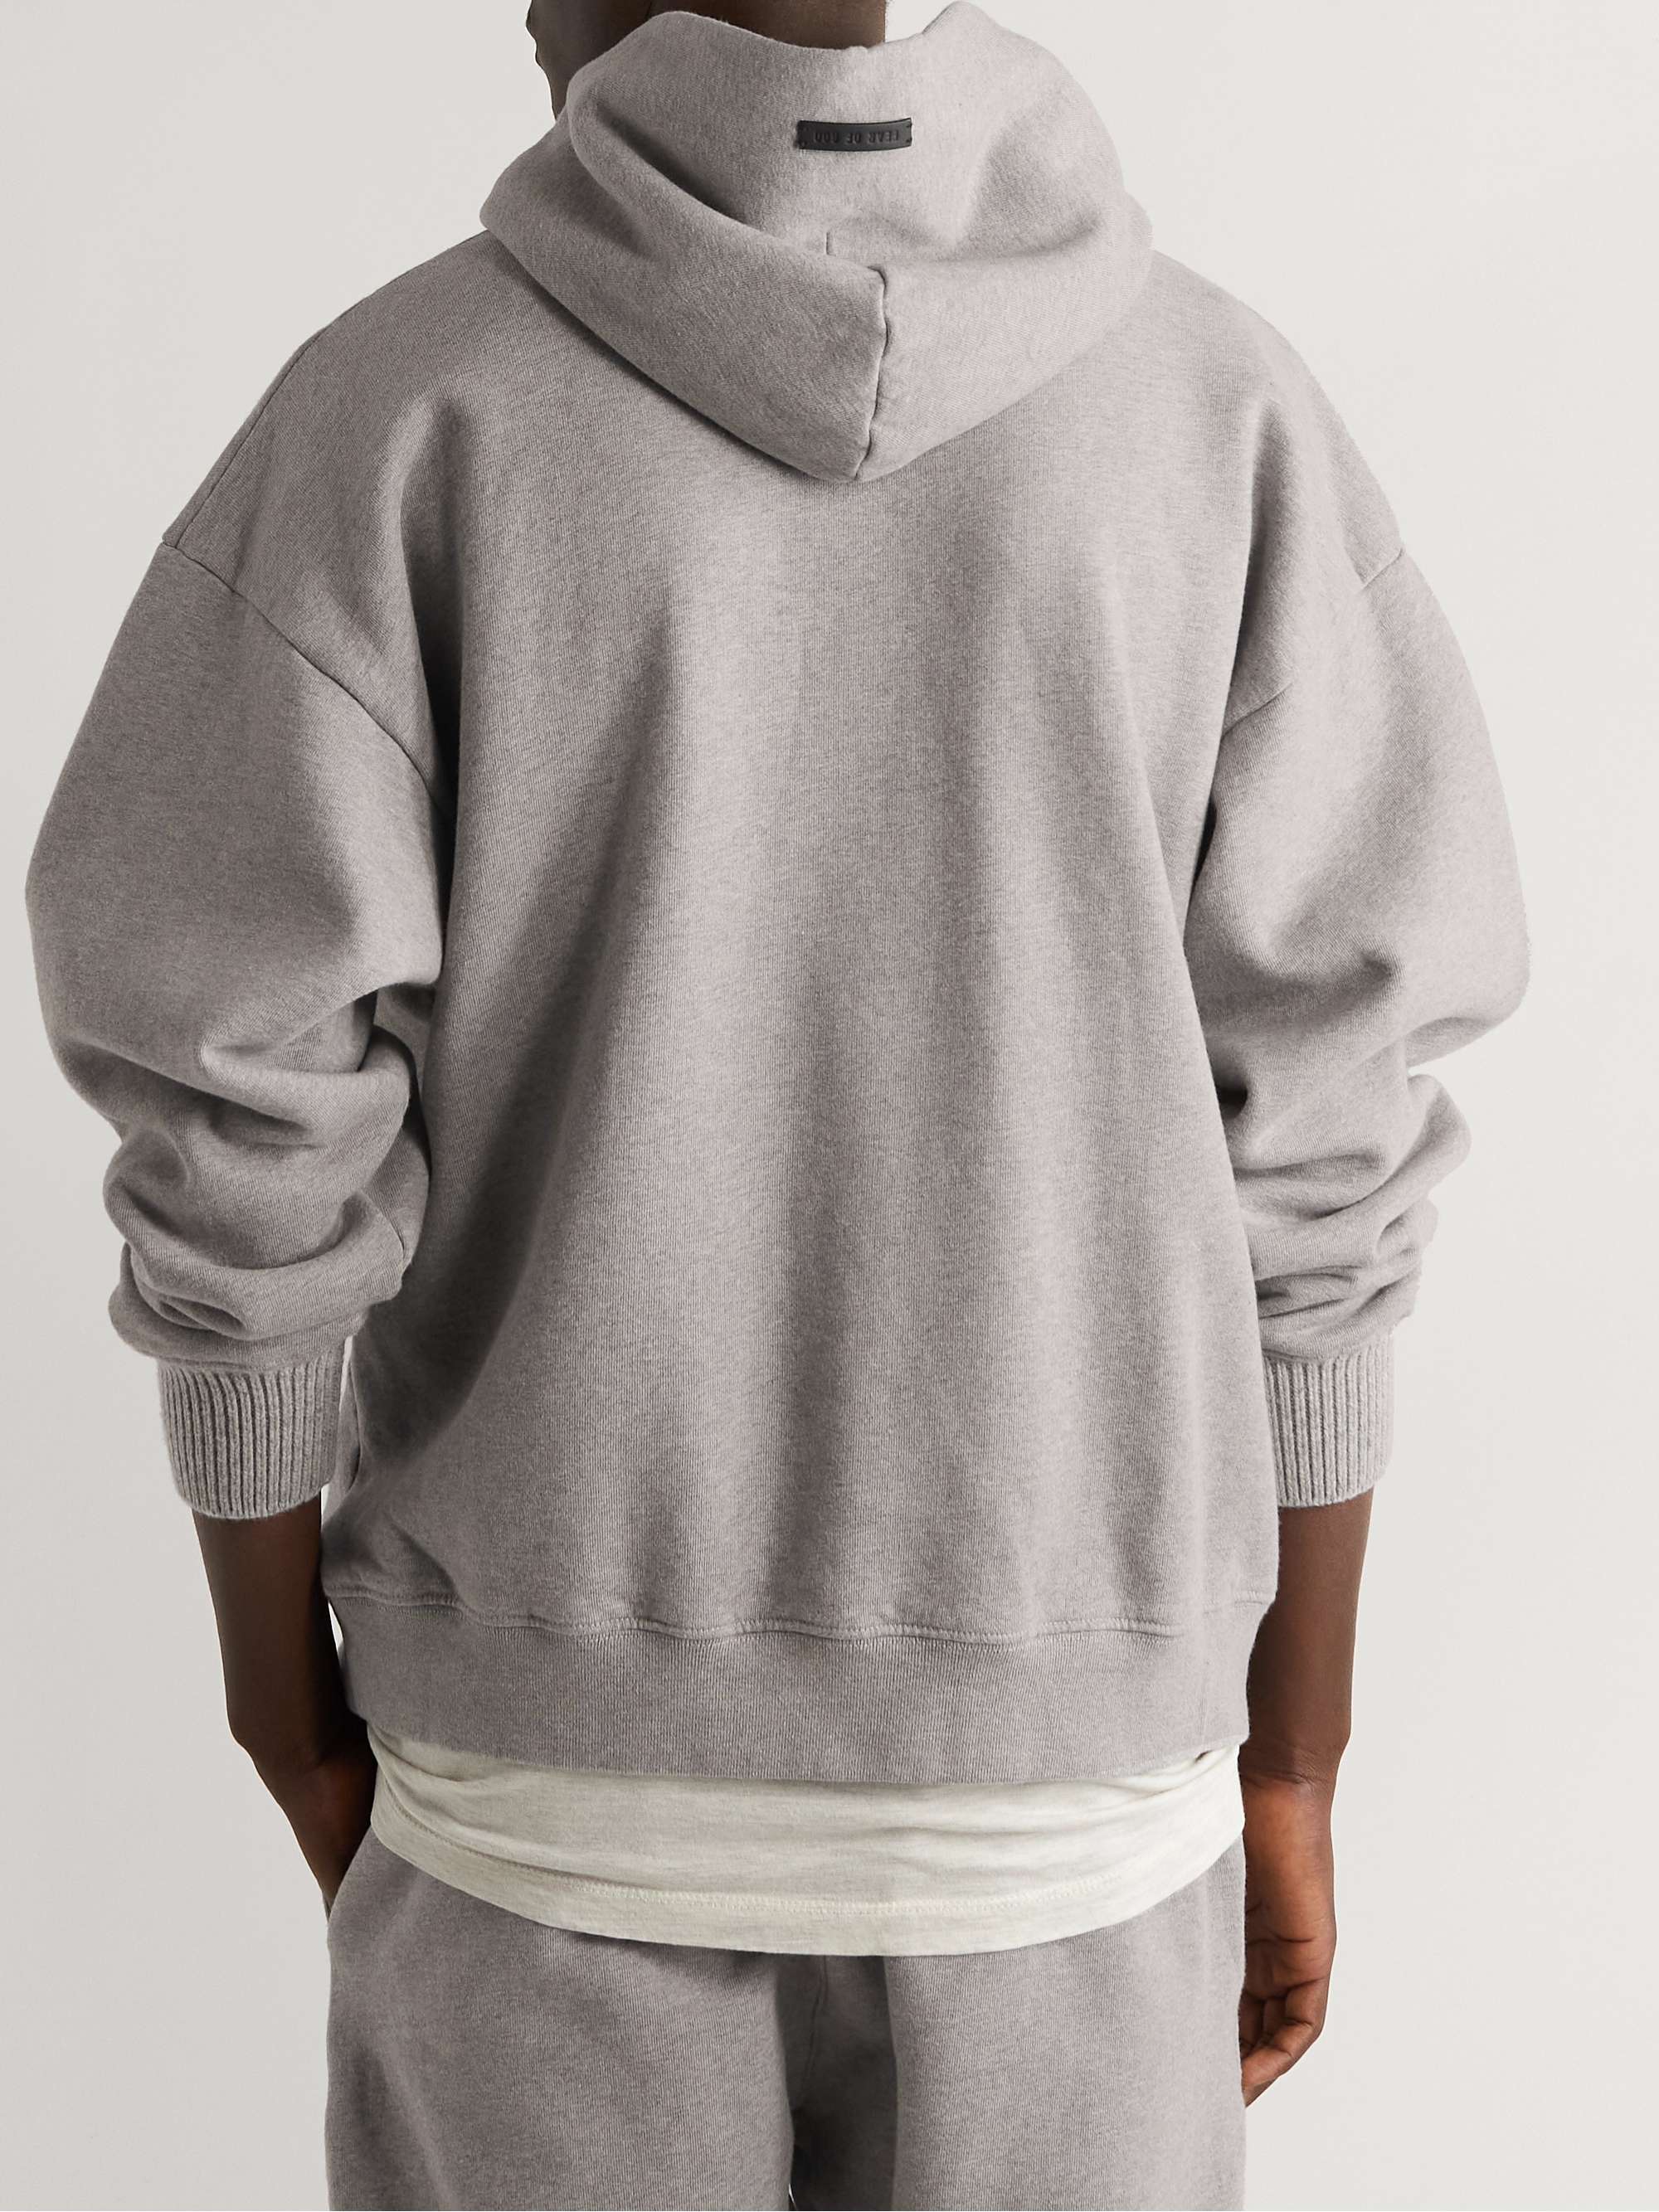 FEAR OF GOD Oversized Cotton-Jersey Hoodie